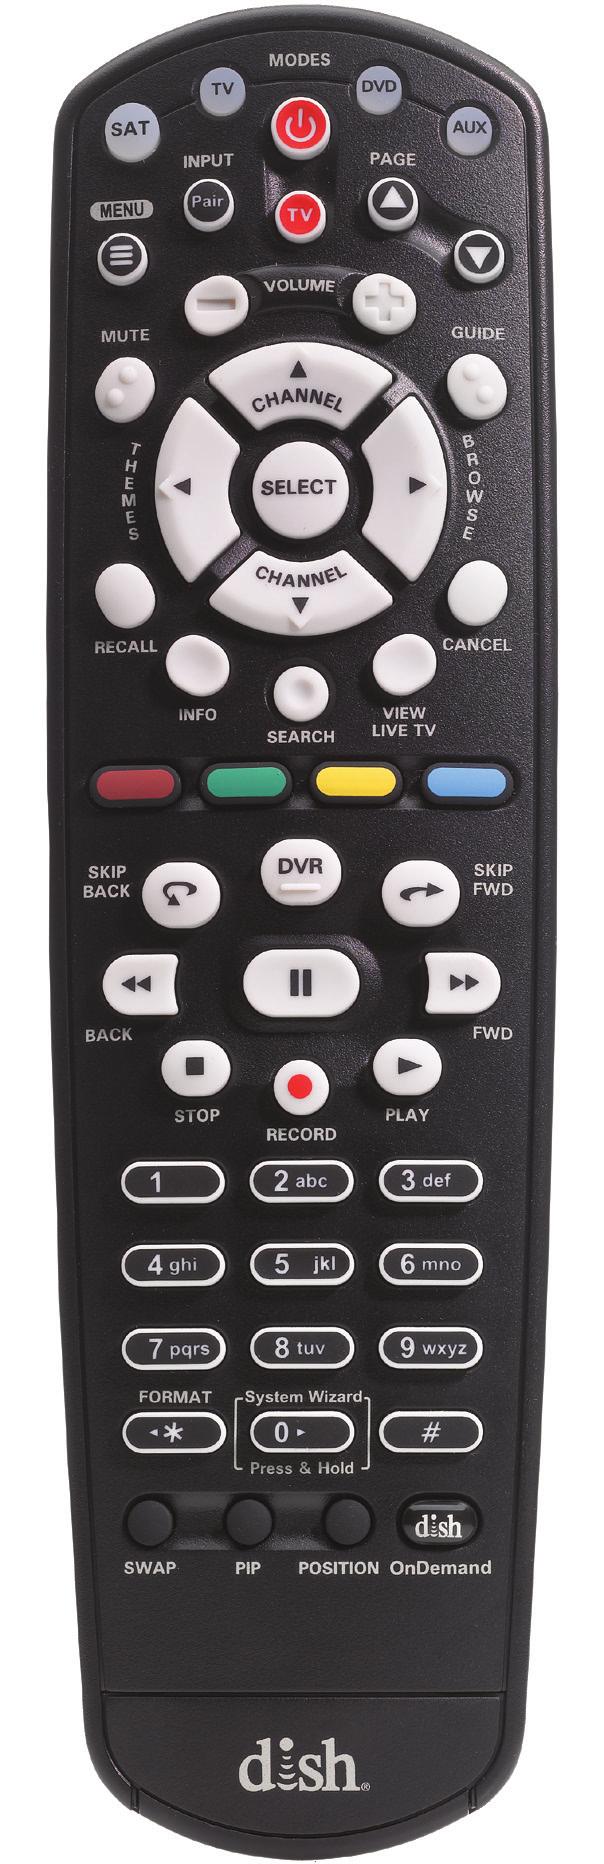 1 Your Remote The remote control makes it easy for you to watch, search, and record programming. Here s a quick overview of the basics to get you started.